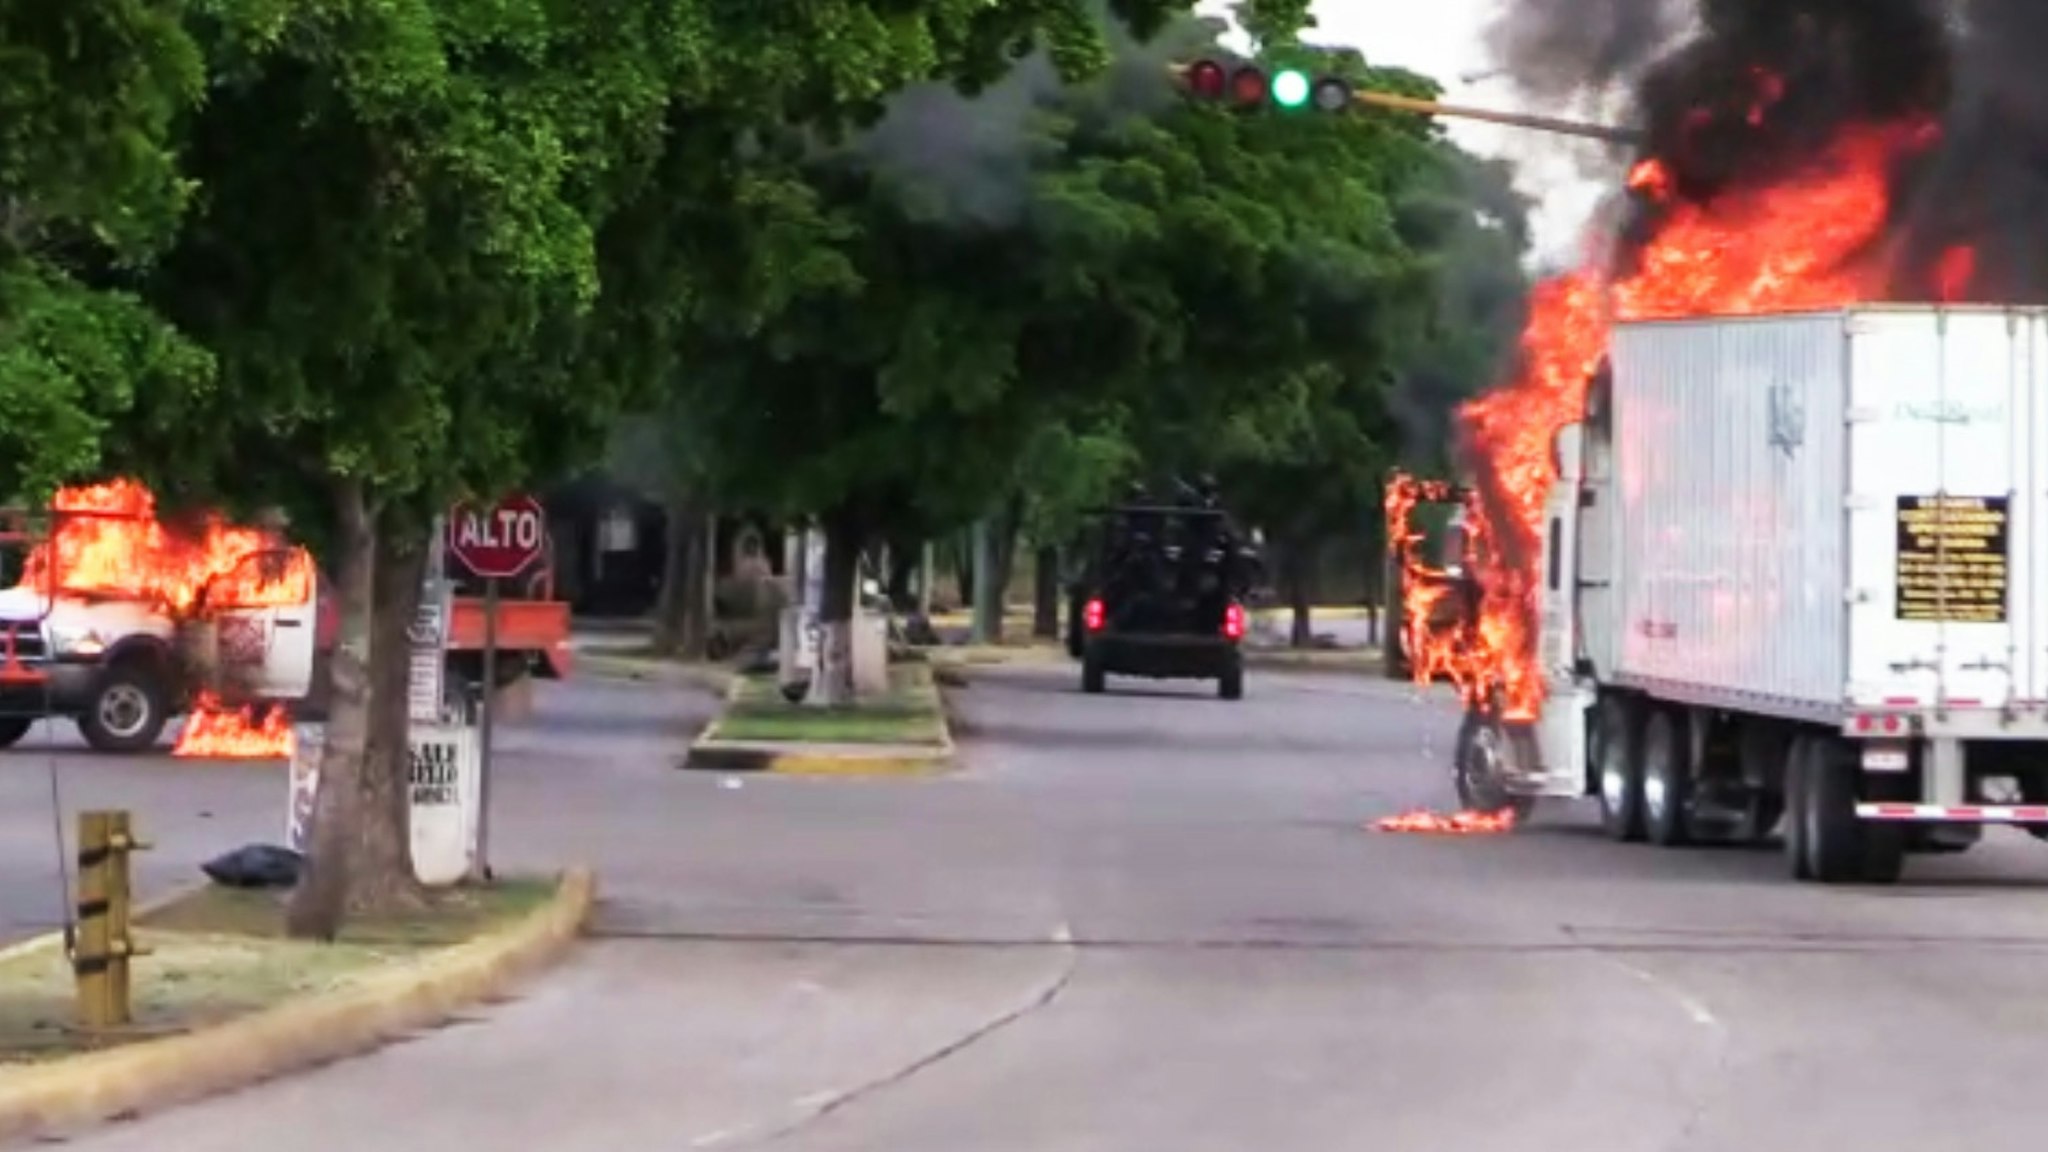 In this AFPTV screen trucks burn in a street of Culiacan, capital of jailed kingpin Joaquin "El Chapo" Guzman's home state of Sinaloa, on October 17, 2019. - Heavily armed gunmen in four-by-four trucks fought an intense battle against Mexican security forces Thursday in the city of Culiacan, capital of jailed kingpin Joaquin "El Chapo" Guzman's home state of Sinaloa.